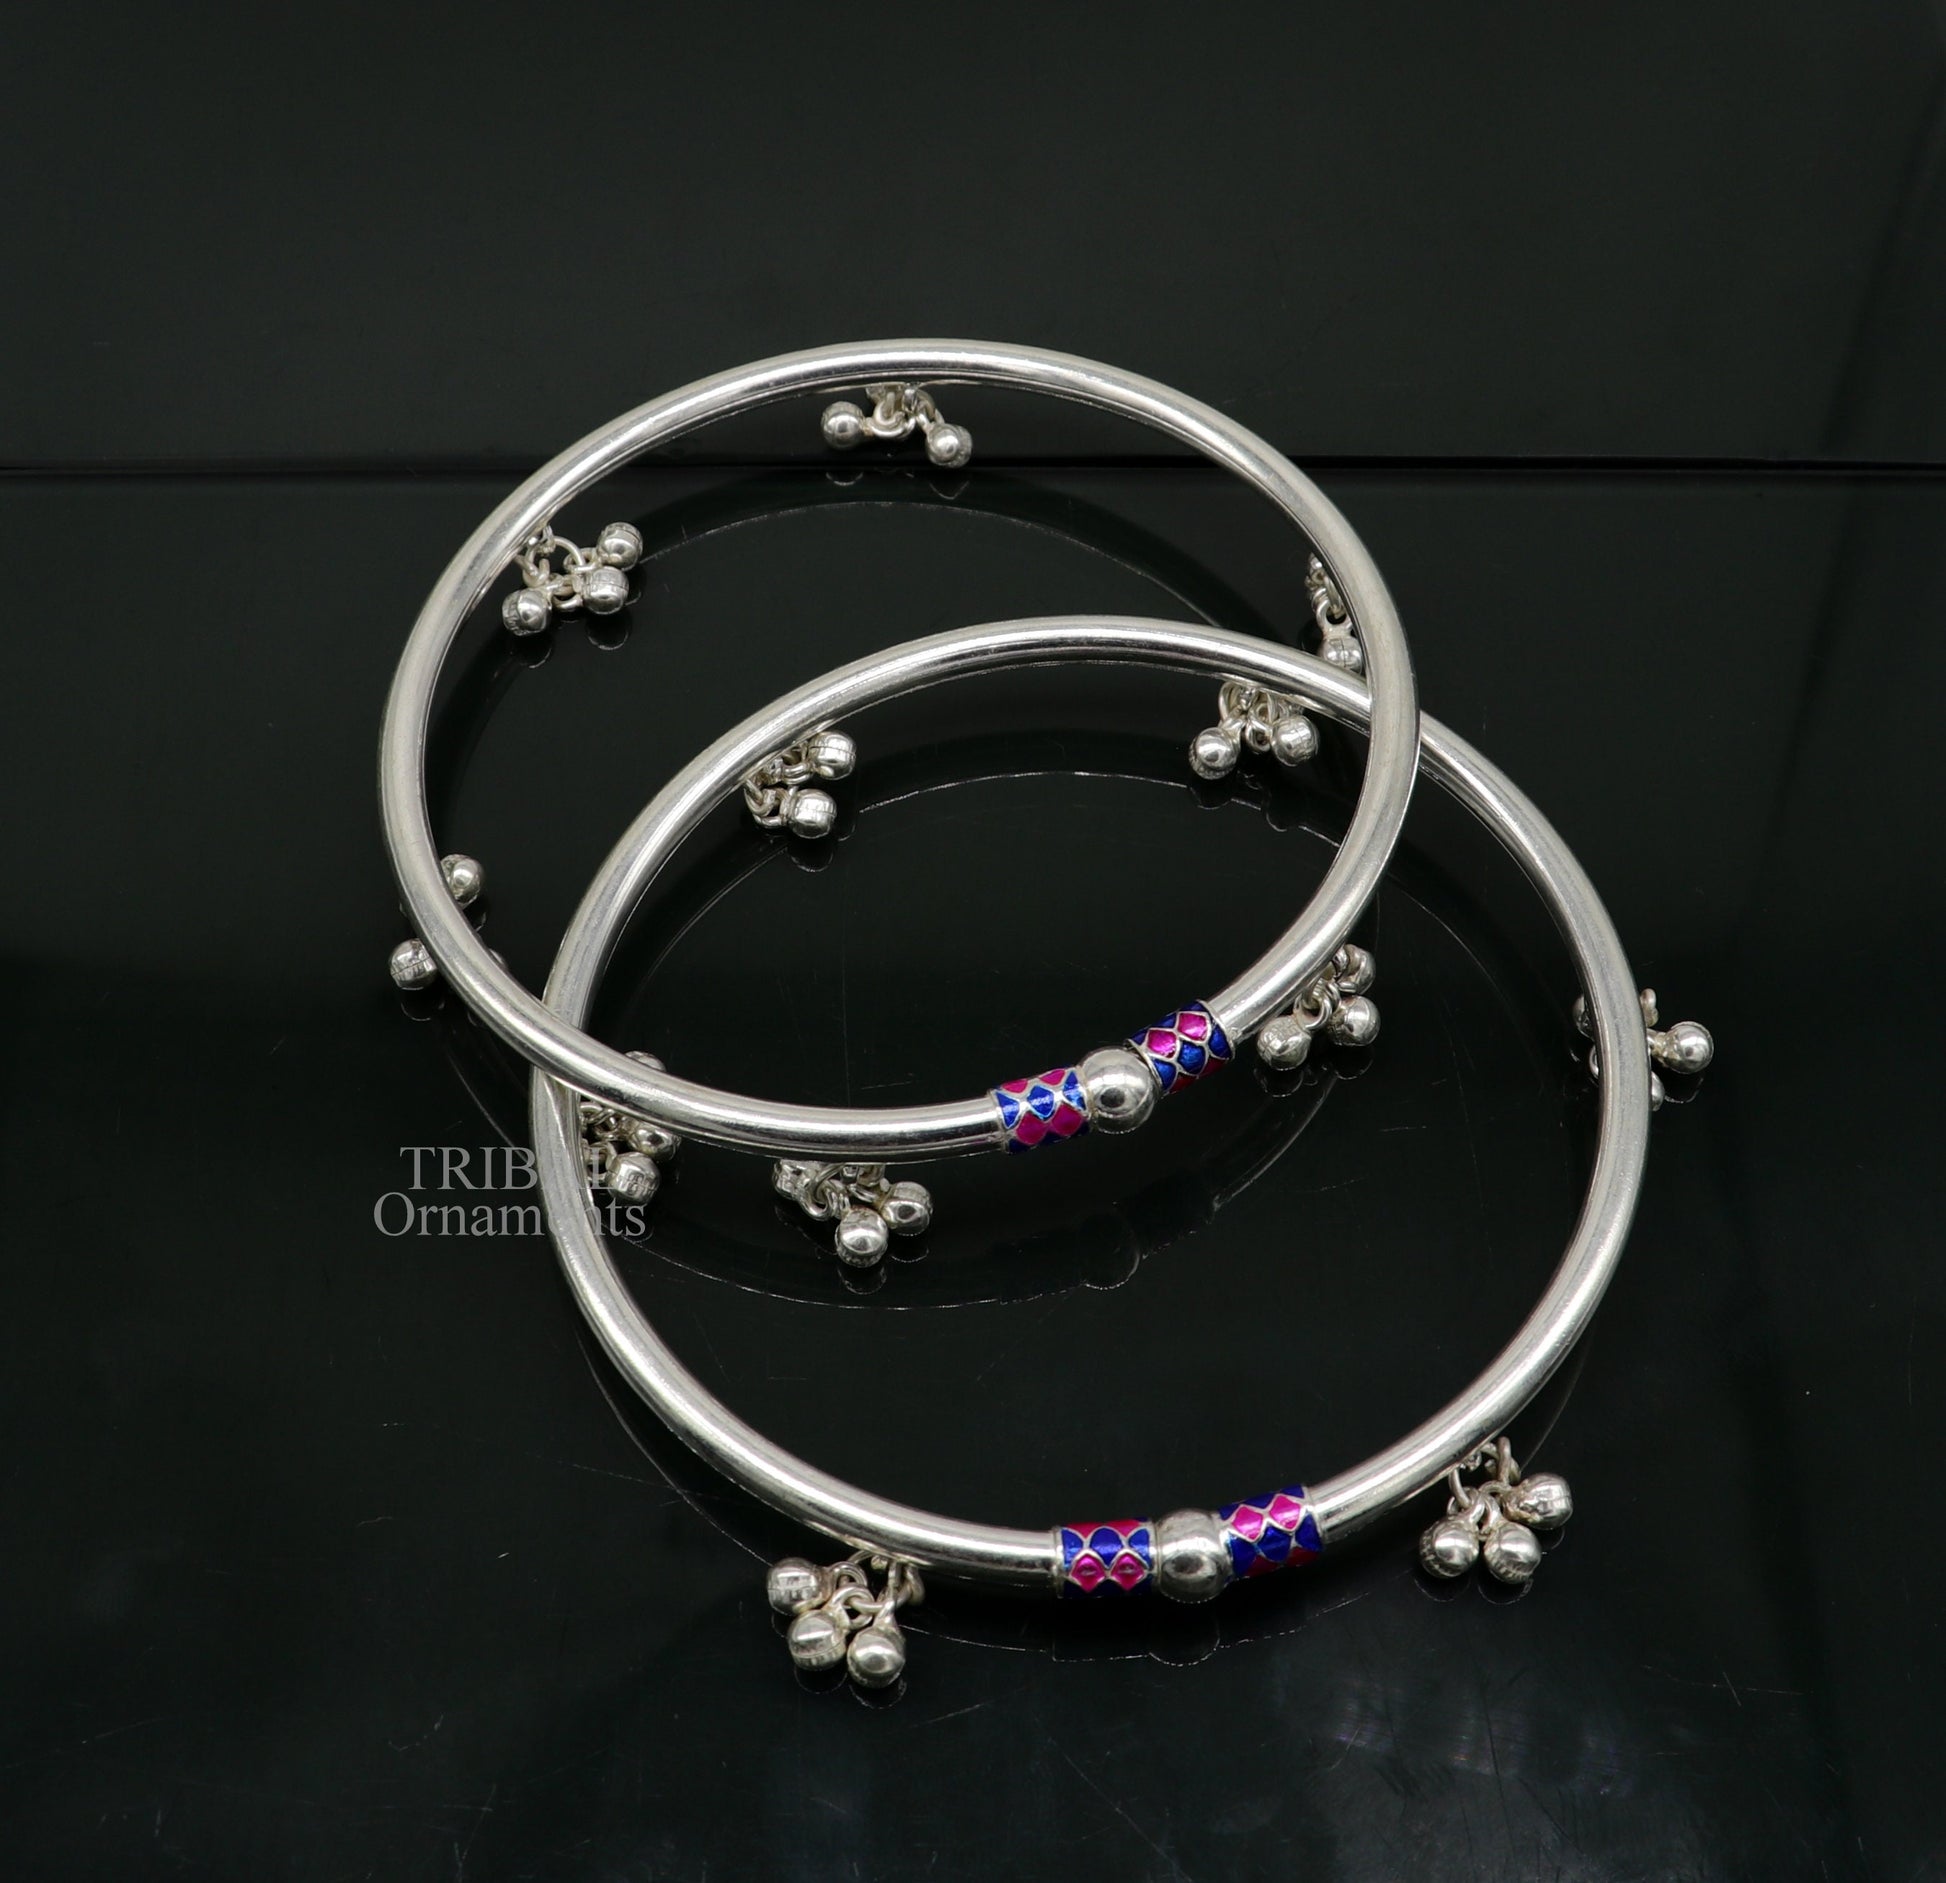 925 sterling silver handmade amazing foot ankle plain bracelet kada with hanging noisy bells, belly dance jewelry from Rajasthan nsfk58 - TRIBAL ORNAMENTS